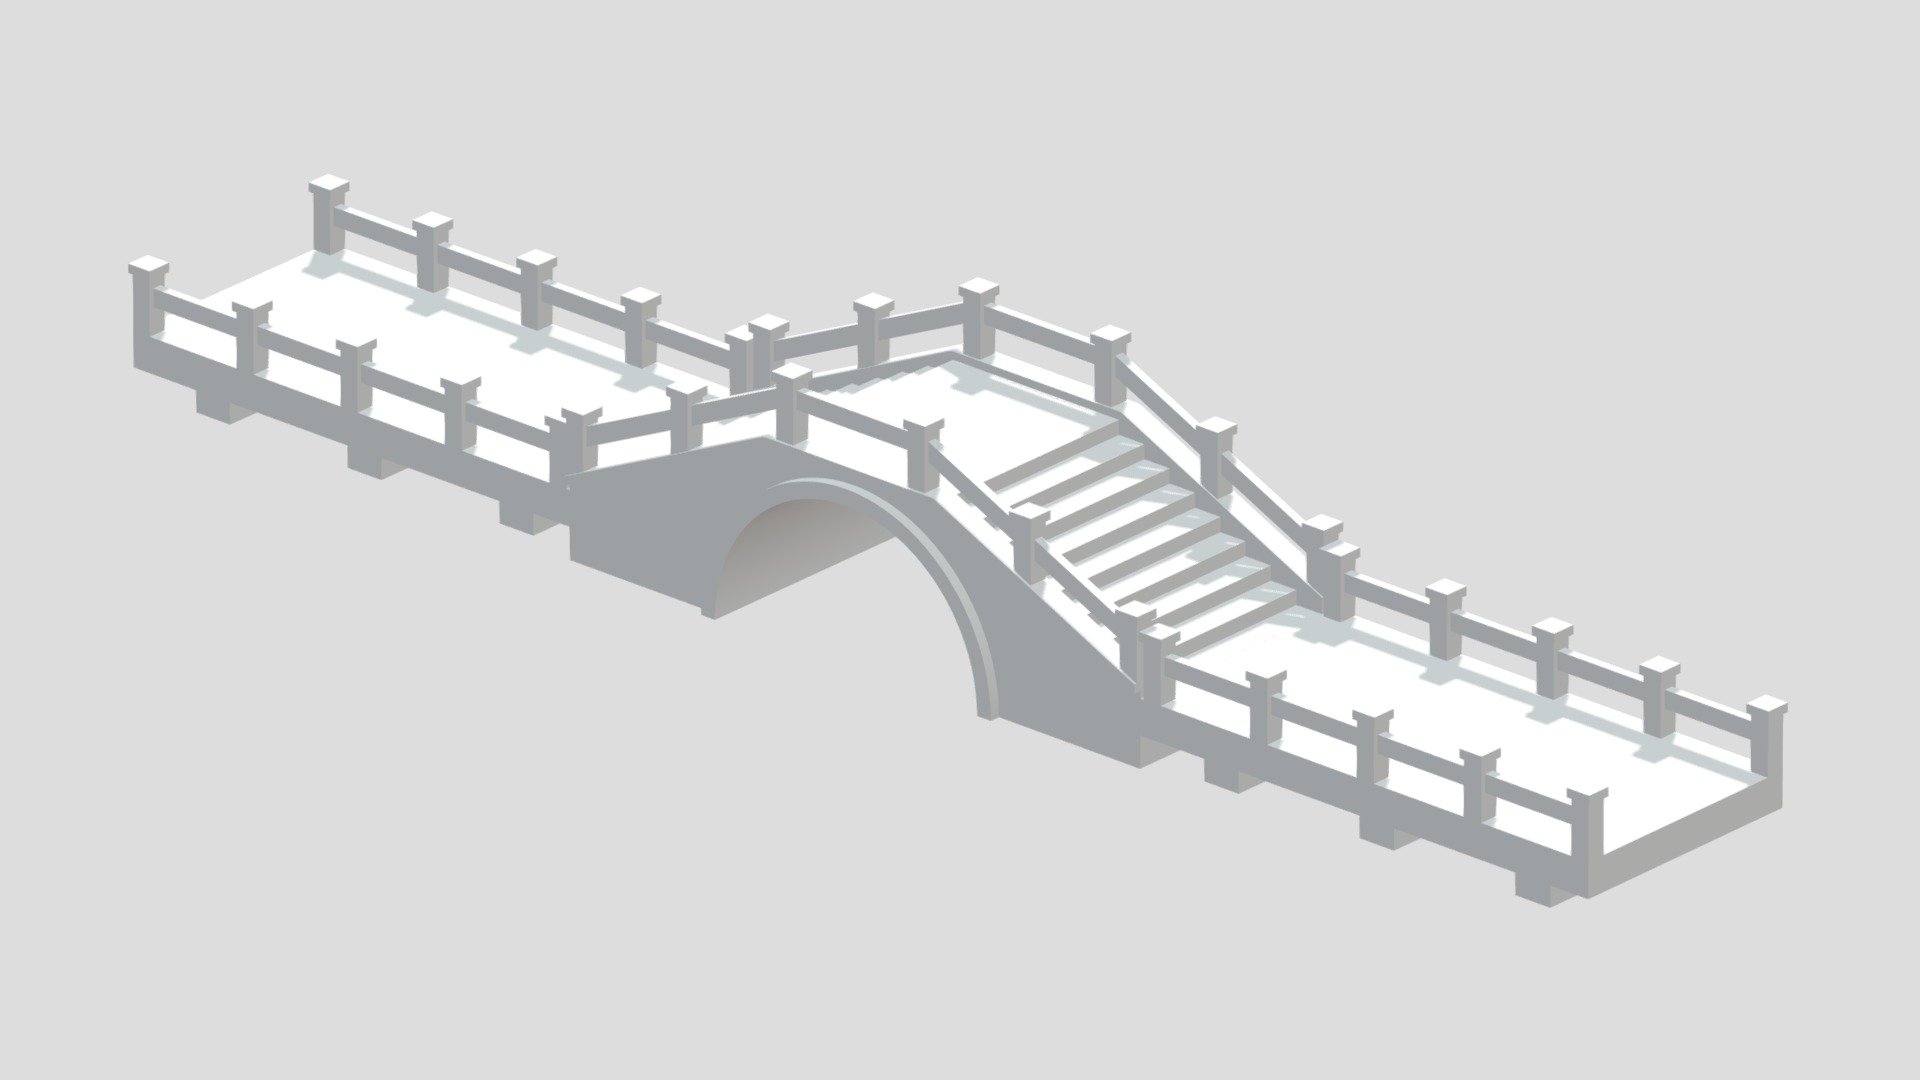 -Cartoon Chinese Stone Bridge.

-This product contains 3 objects.

-Total vert: 2,122, poly: 1,513.

-Real World Scale.

-Materials and objects have the correct names.

-This product was created in Blender 2.935.

-Formats: blend, fbx, obj, c4d, dae, abc, stl, glb, unity.

-We hope you enjoy this model.

-Thank you 3d model